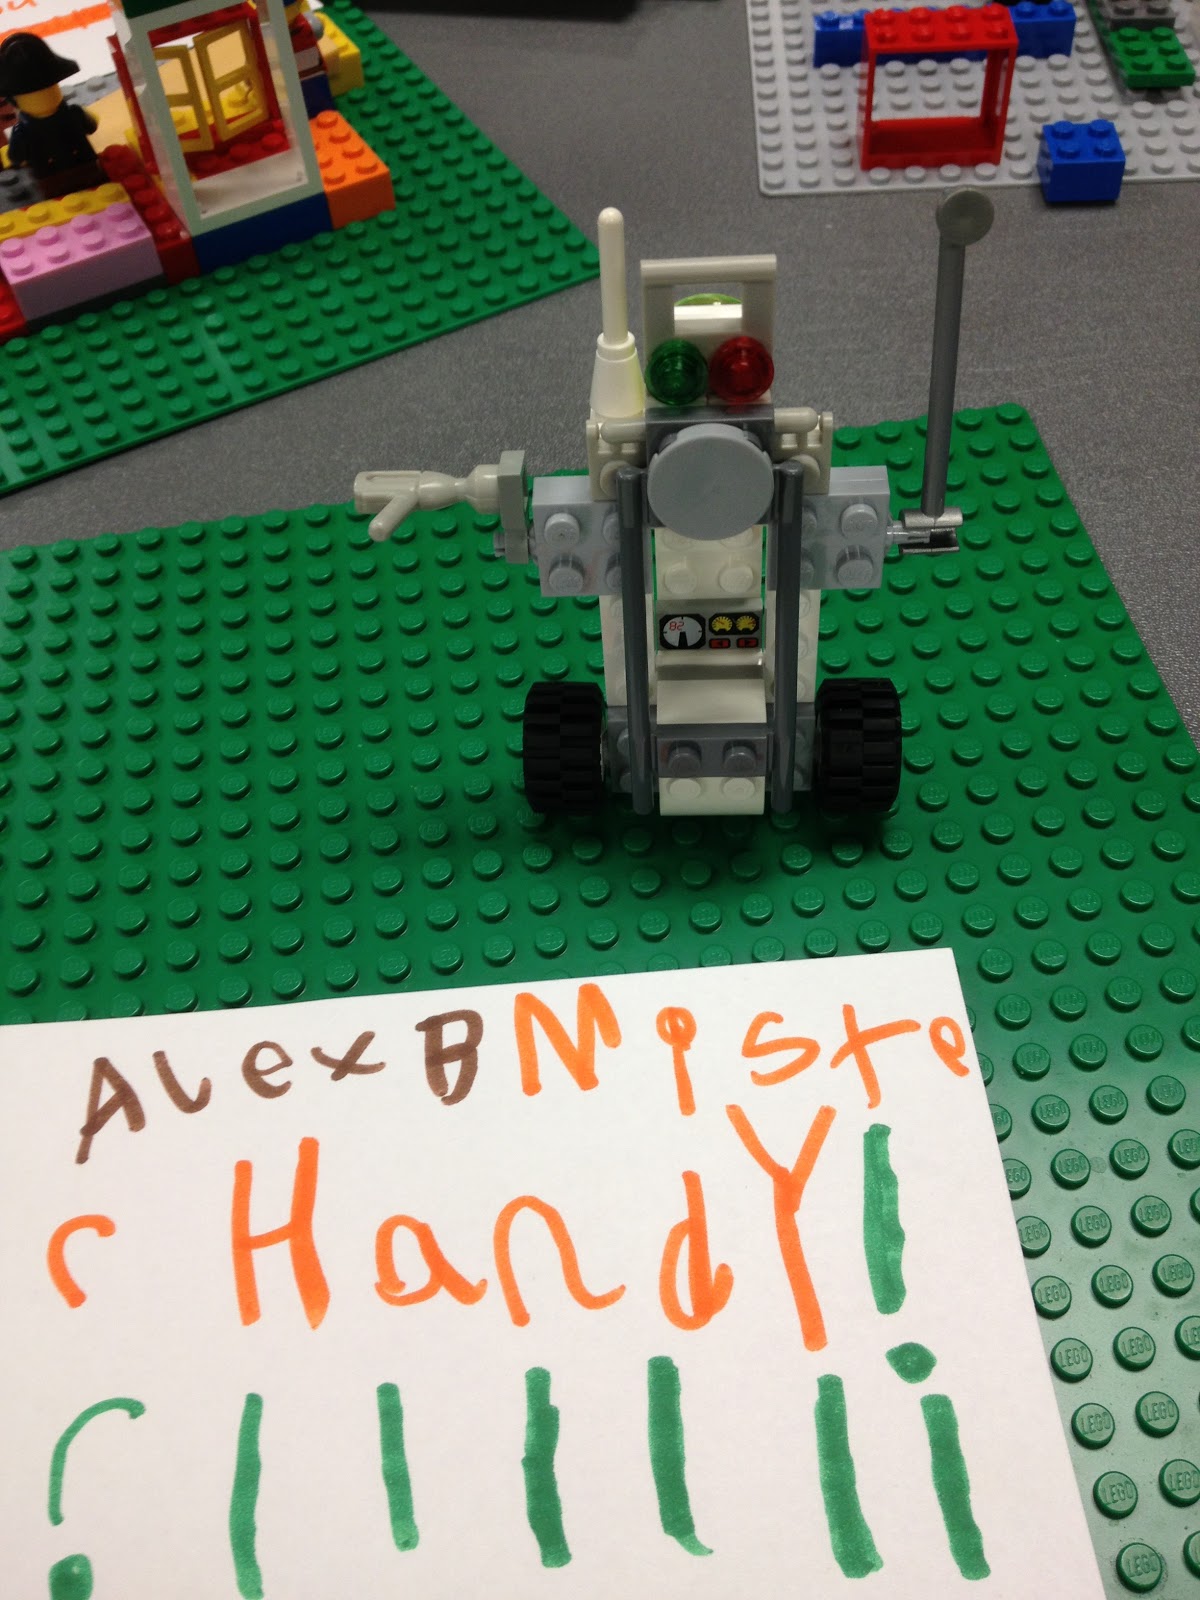 The Show Me Librarian: How to Host a Lego Club